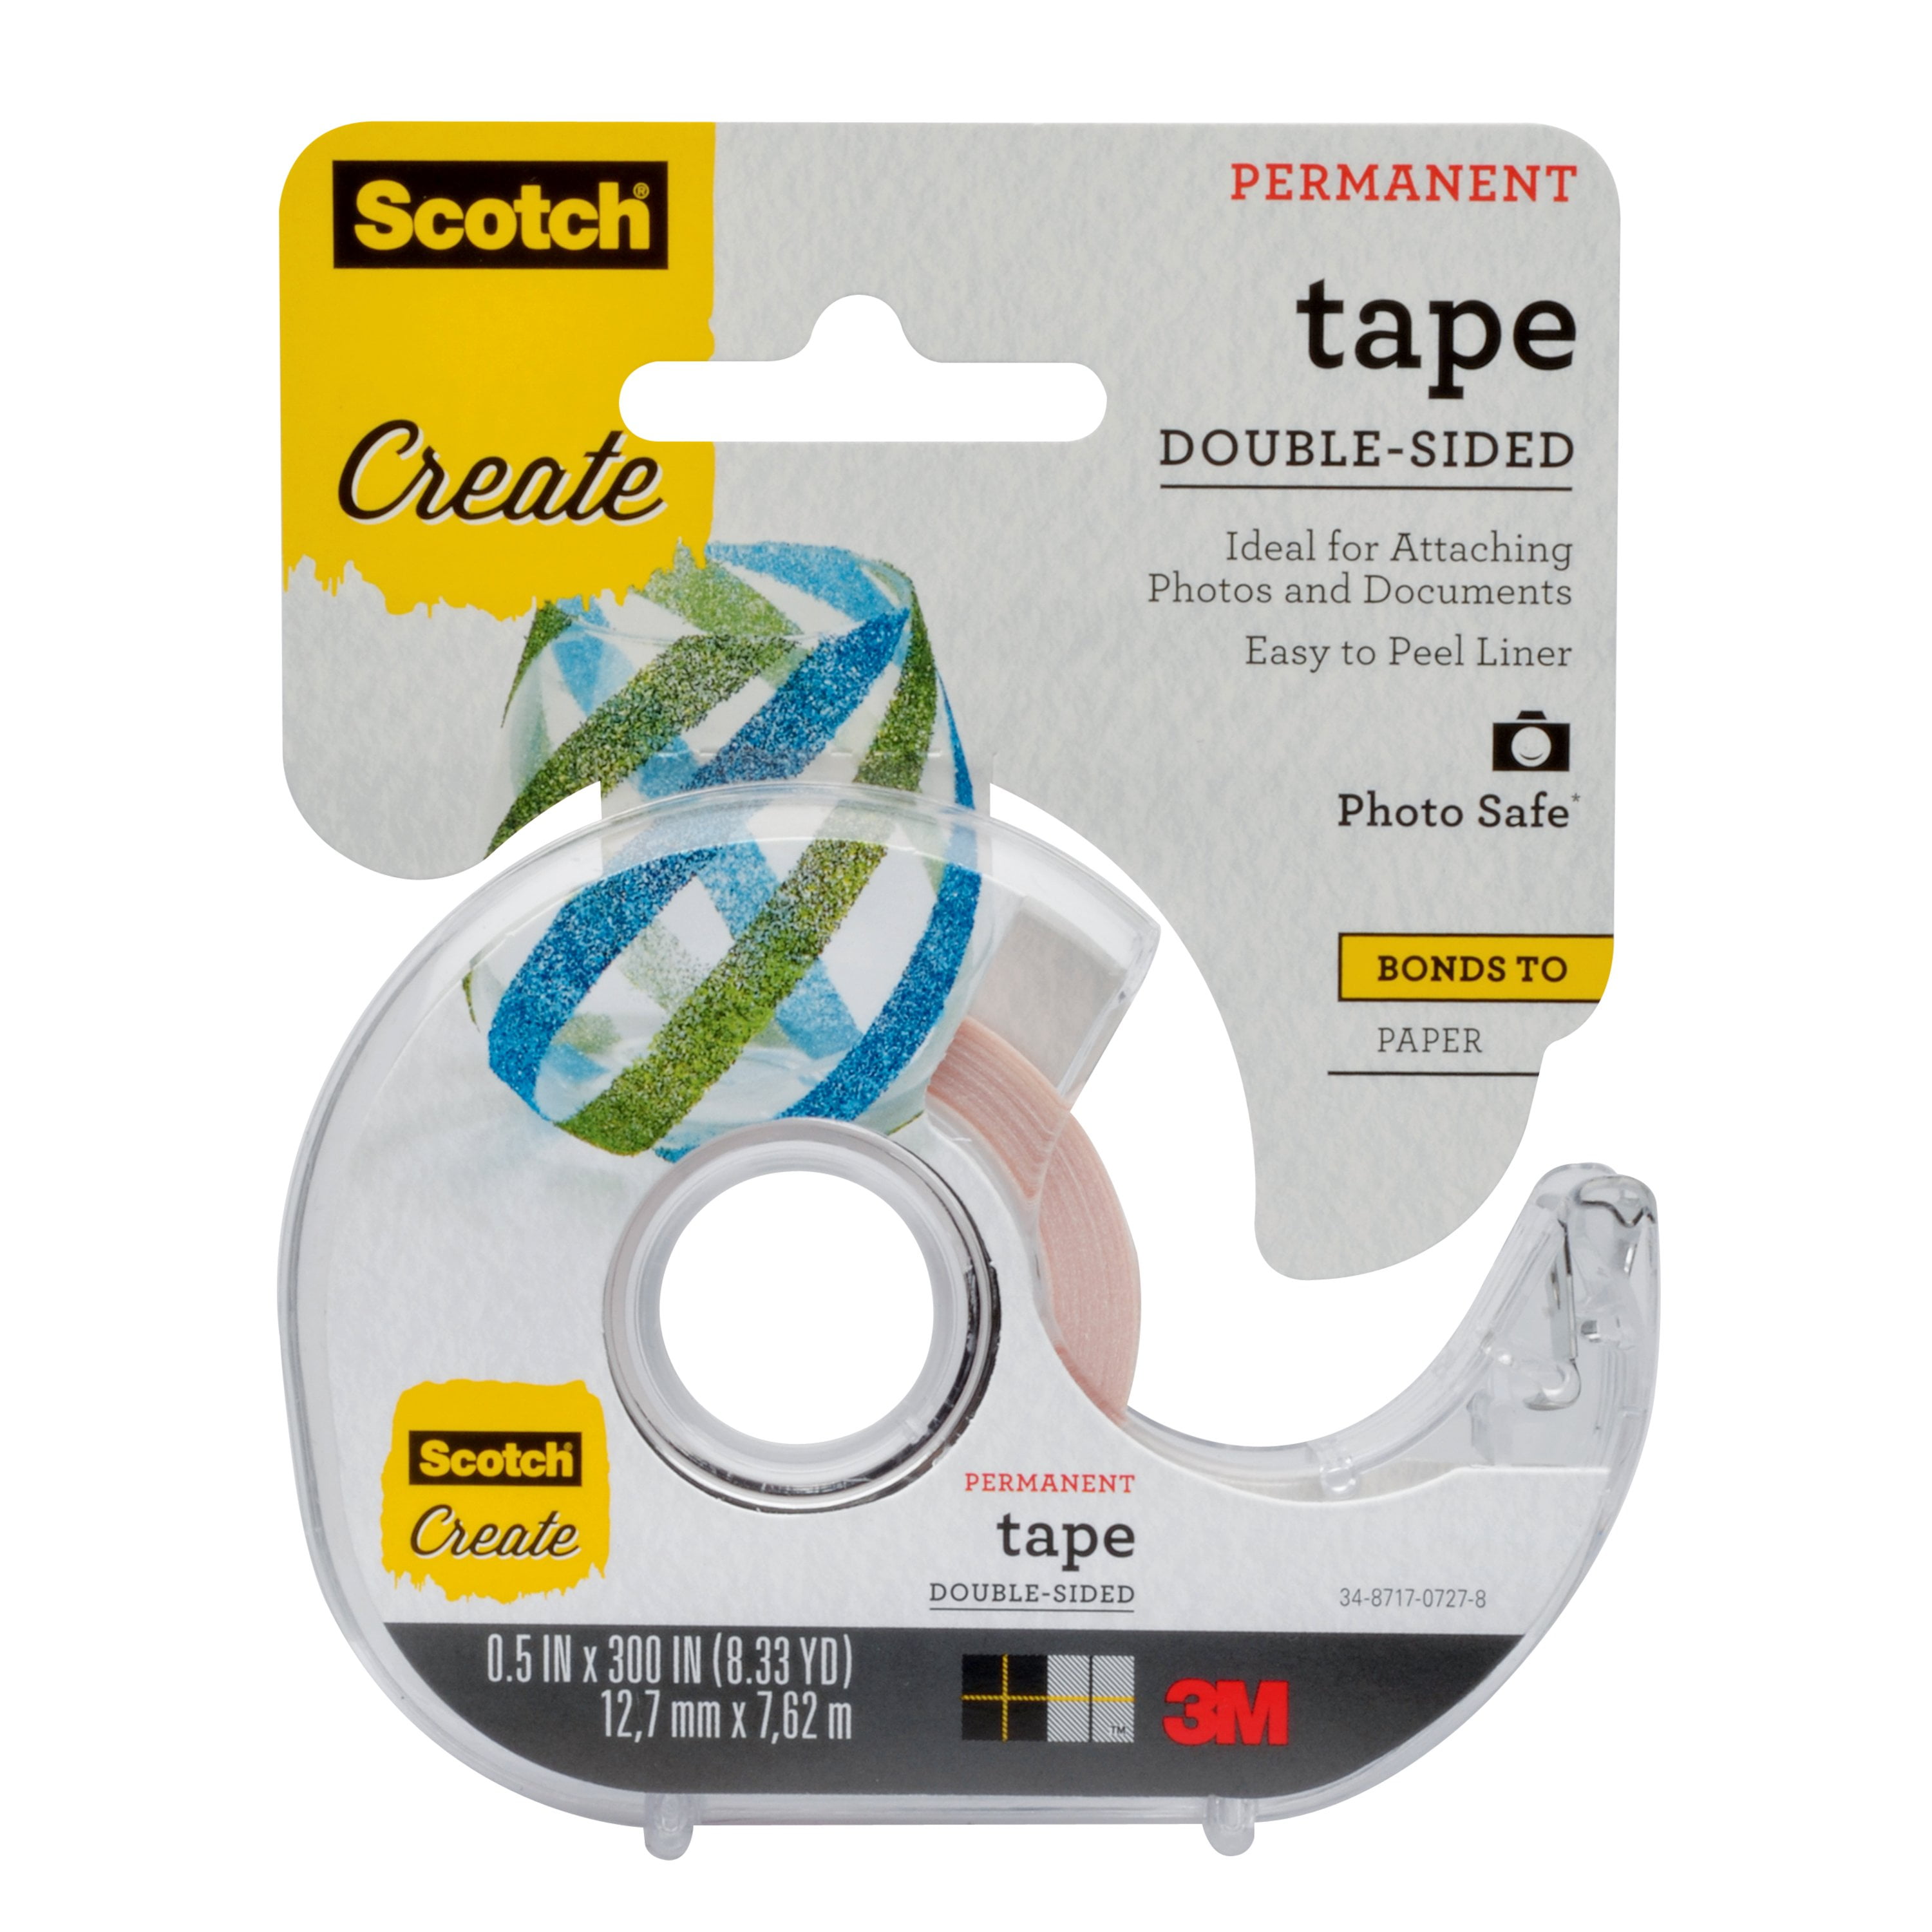  Double Sided Adhesive Tape Heavy Duty - Basting Tape Double  Sided Fabric Tape Vinyl Tape Craft Tape Sewing Tape Home Improvement  Supplies - Fabric Adhesive Grip Tape Scrapbooking Adhesive Acrylic Tape